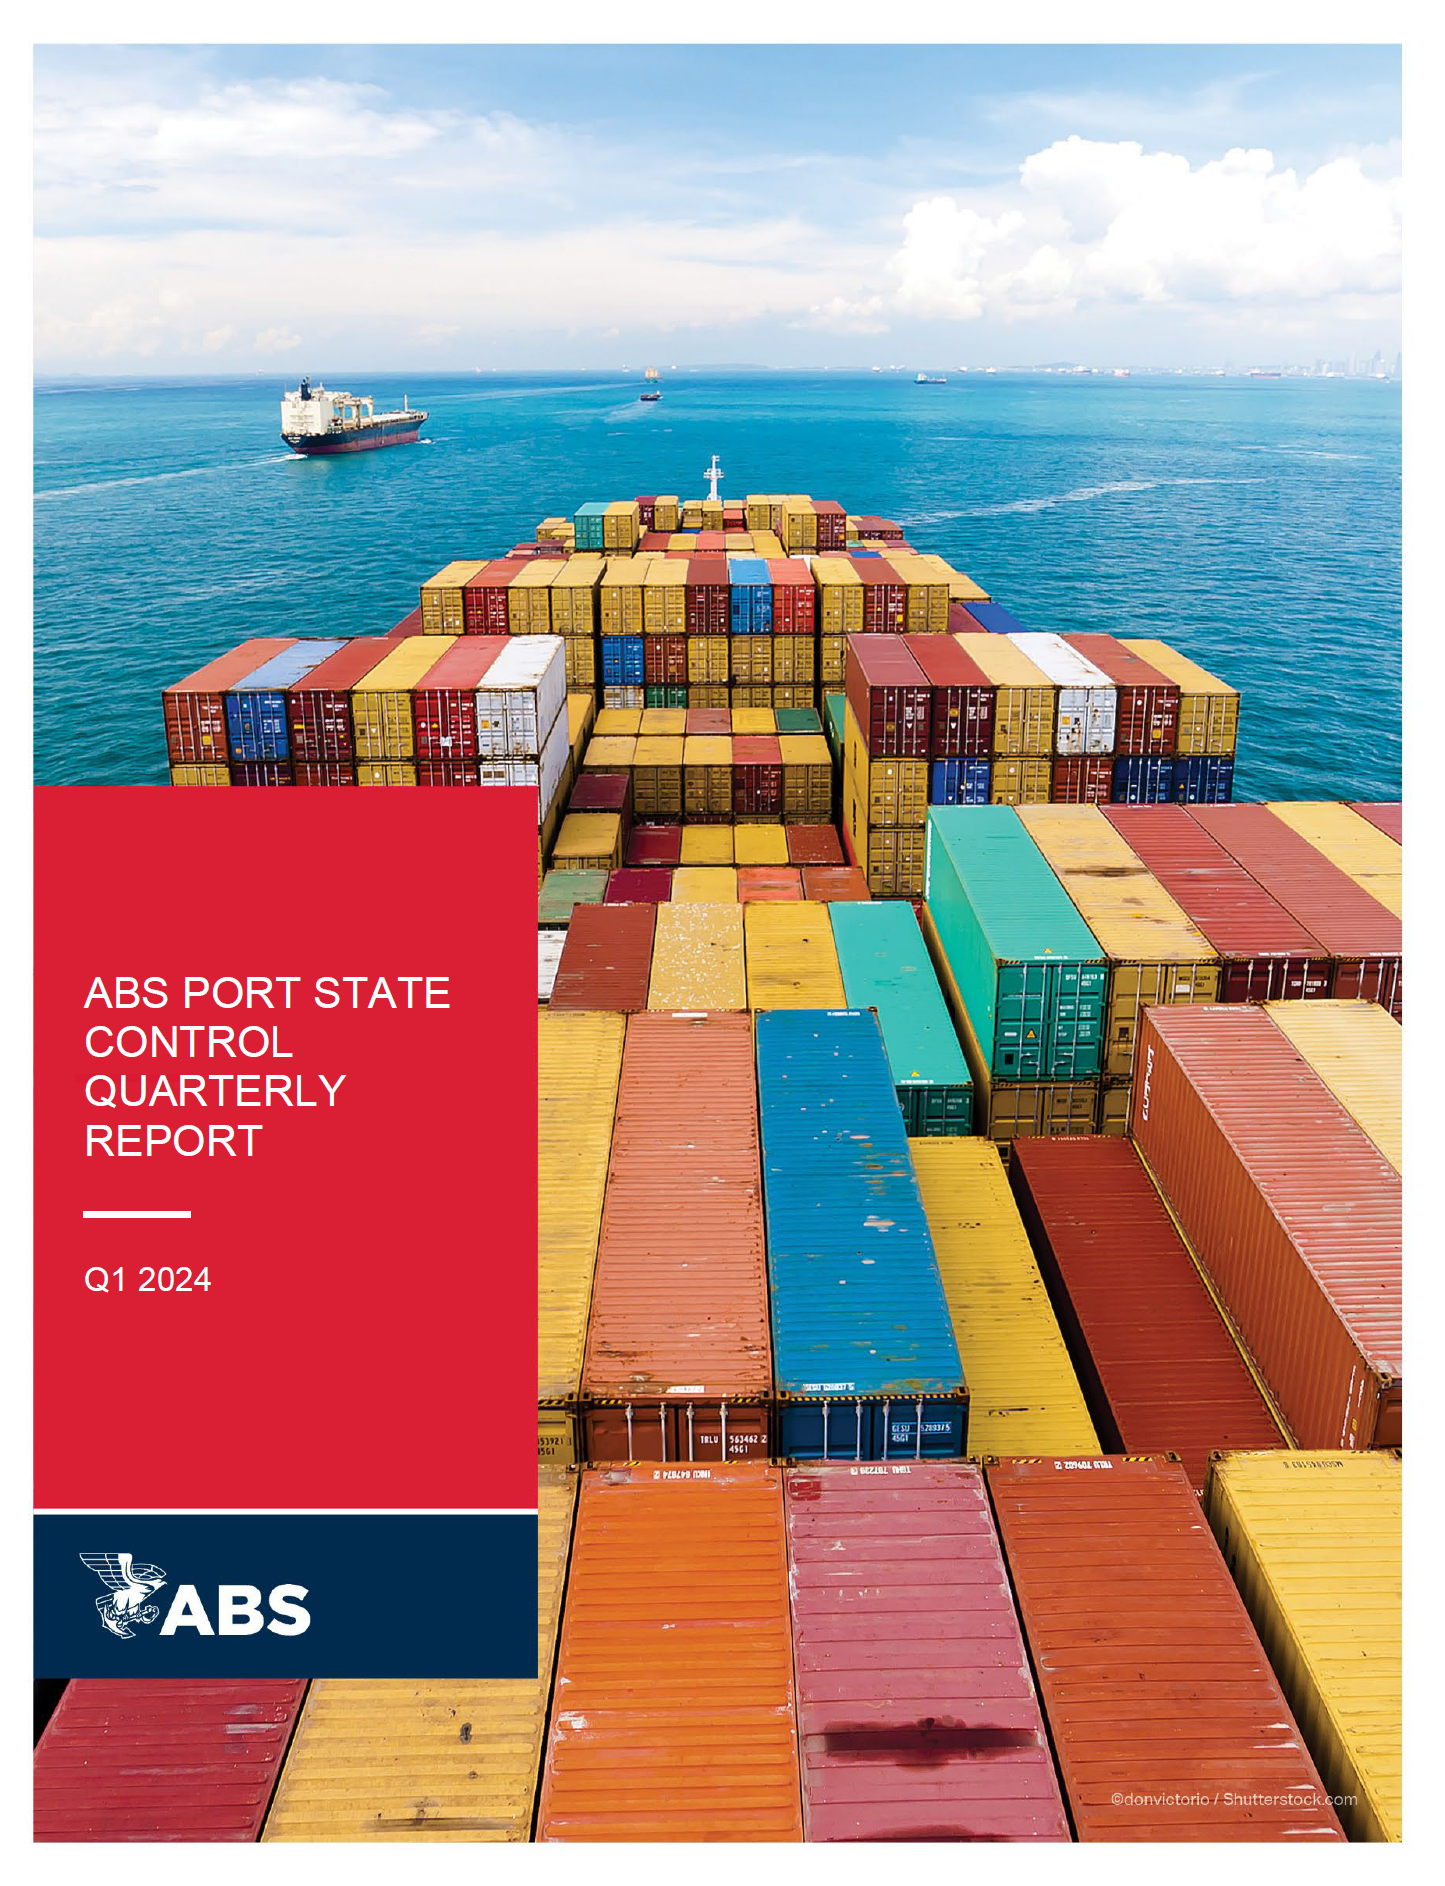 ABS Port State Control Quarterly Report Q4 2023